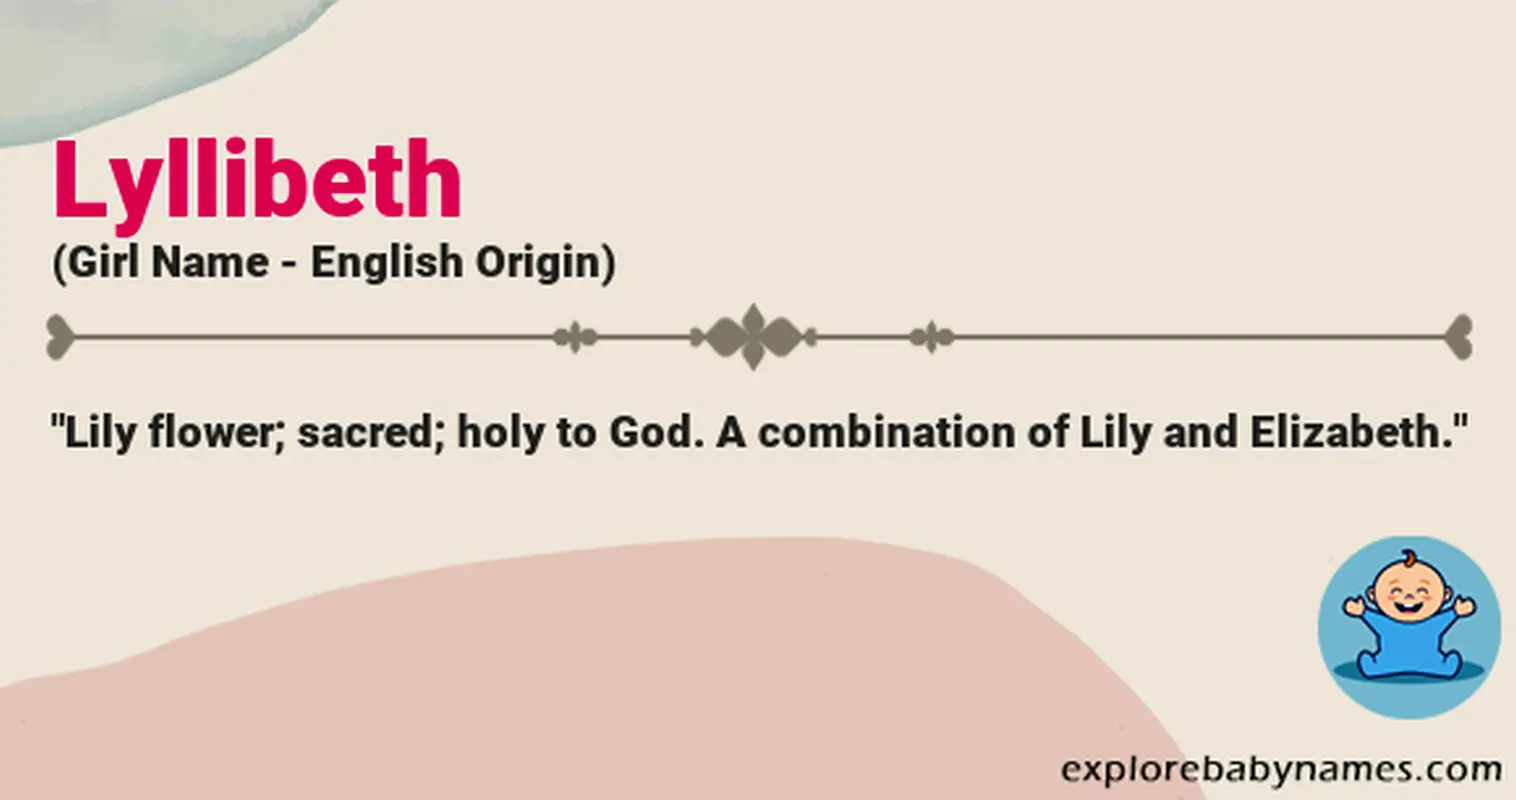 Meaning of Lyllibeth